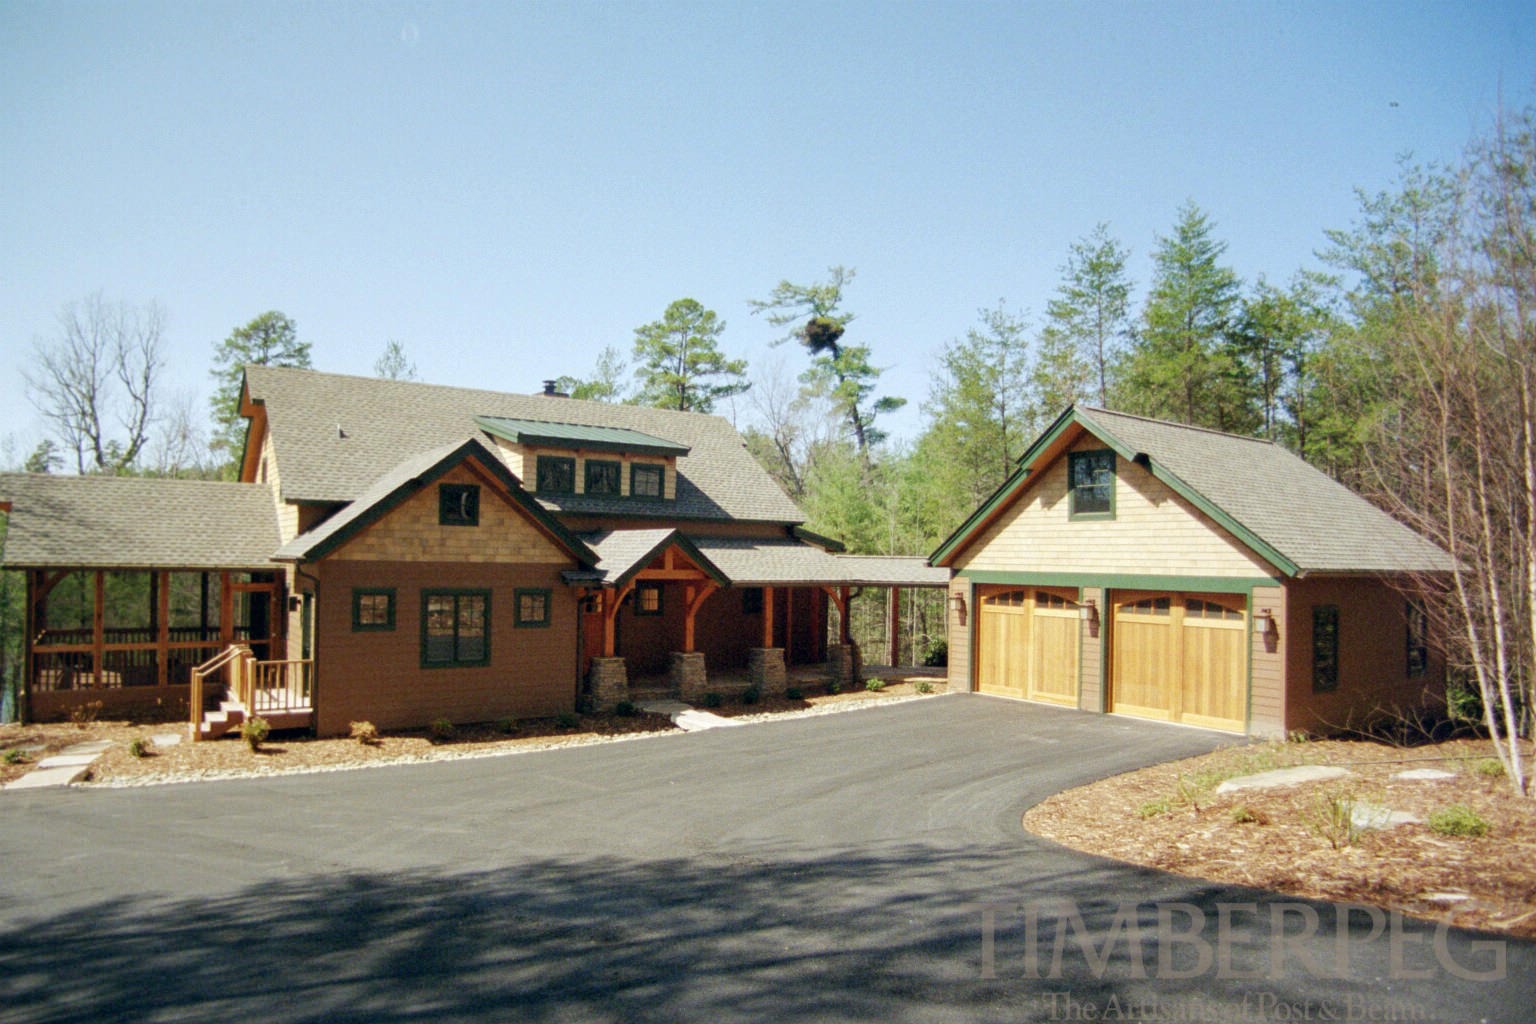 The Dry Creek, NC (T00250) exterior from driveway